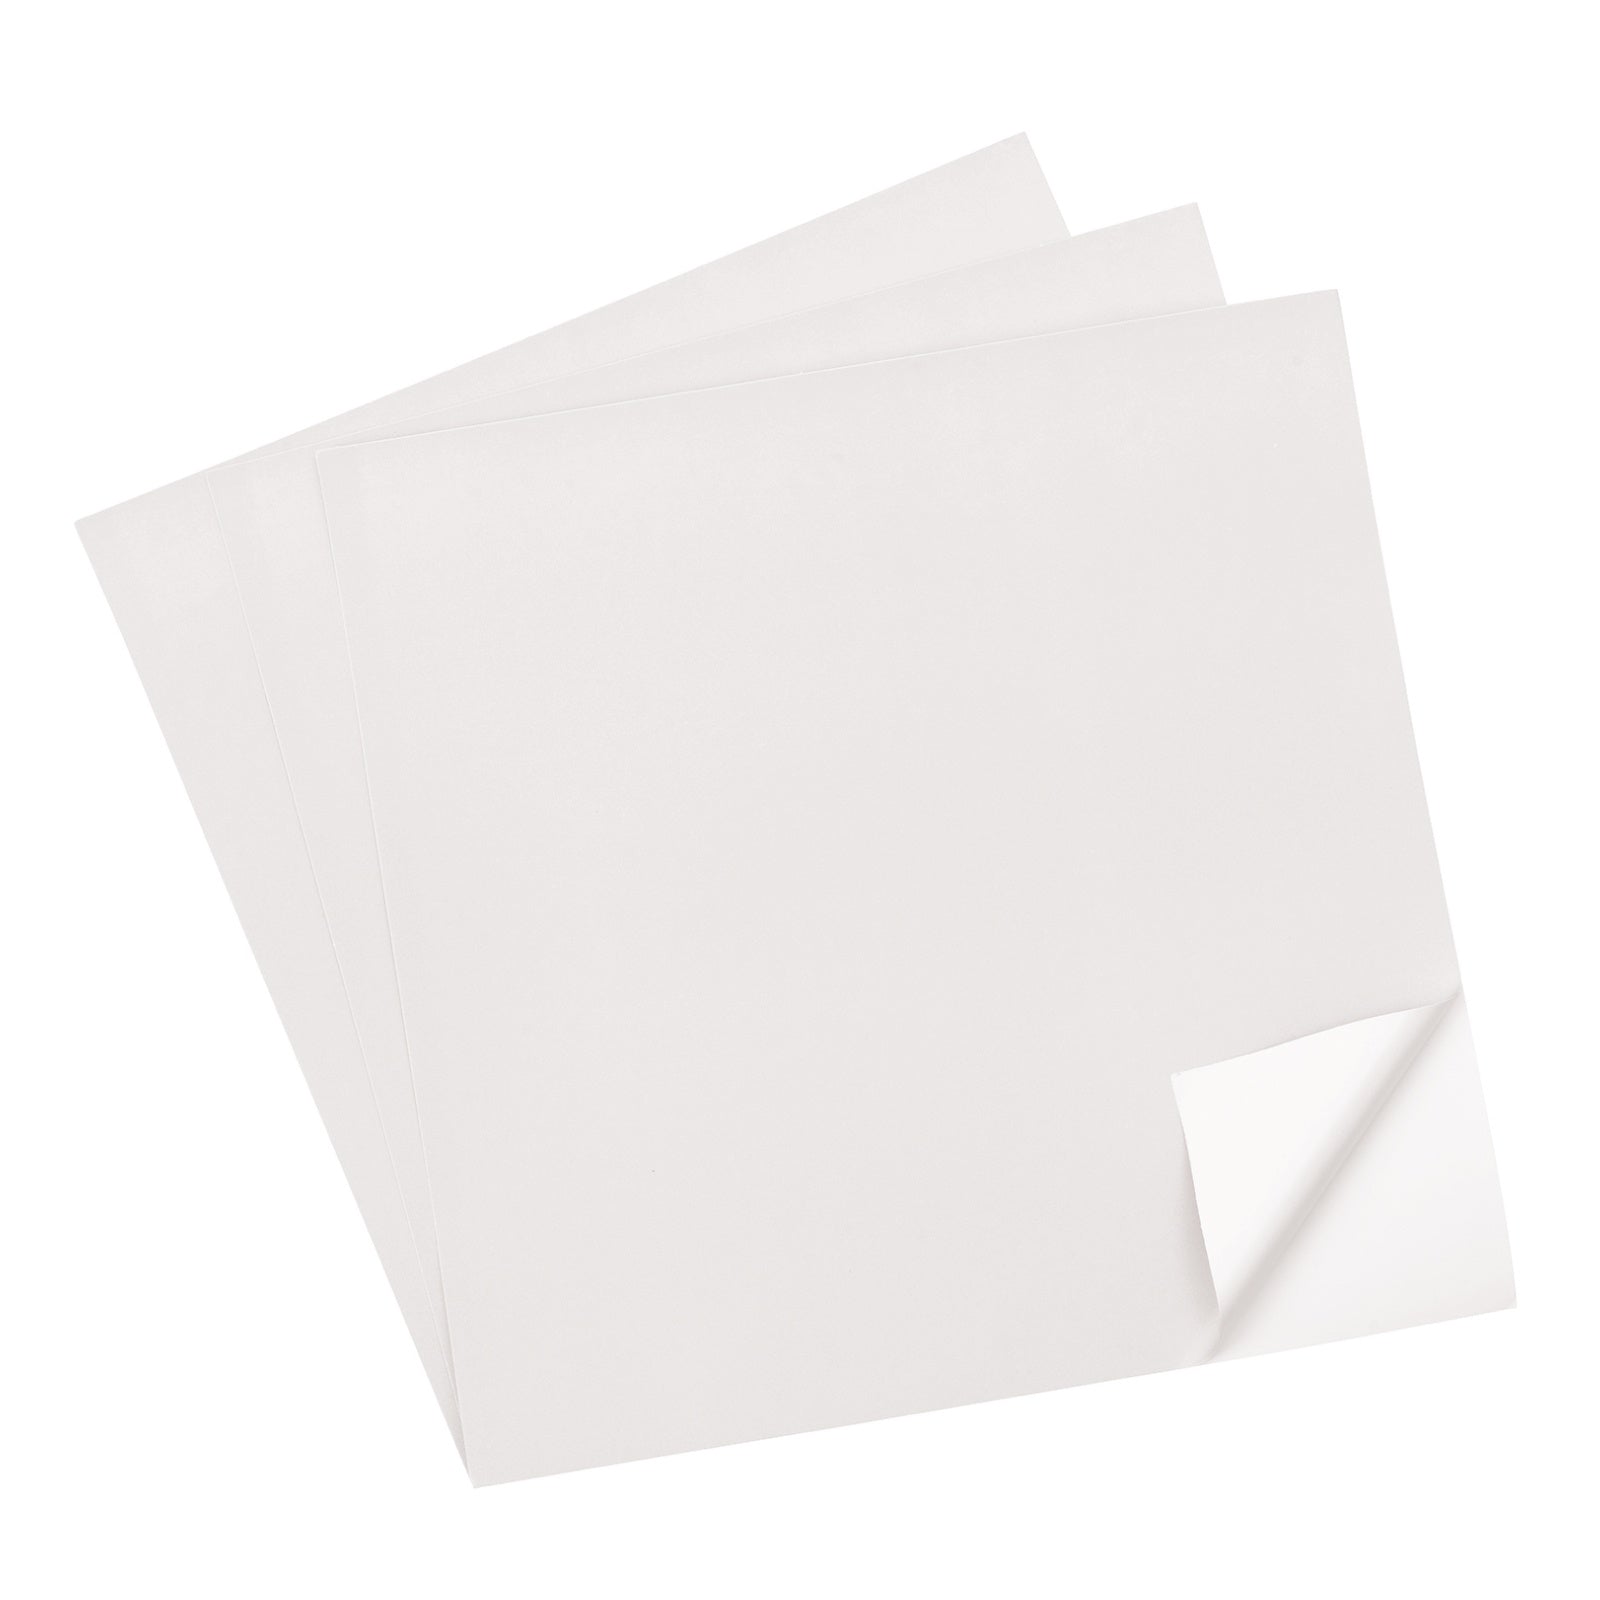 Transparent Double-sided Adhesive Sheets